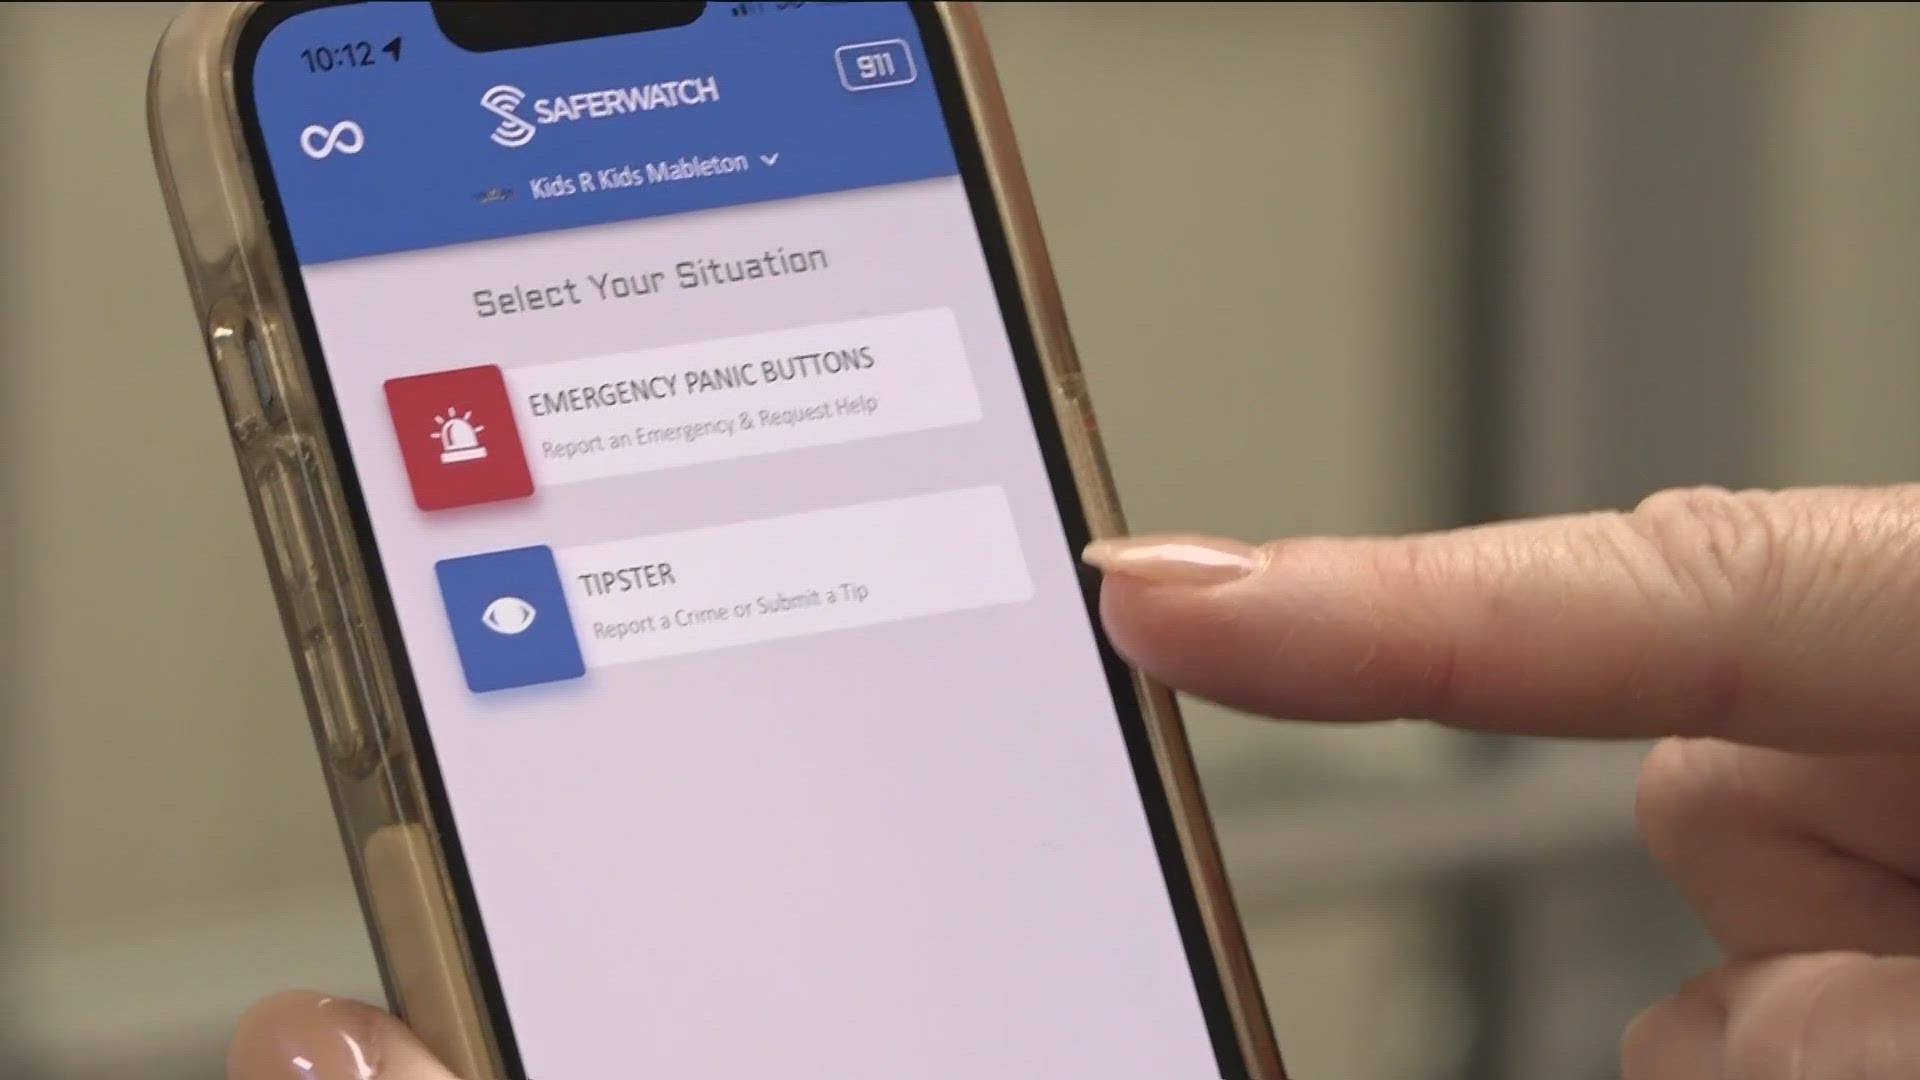 SaferWatch is one of several apps that alert authorities to issues at a school